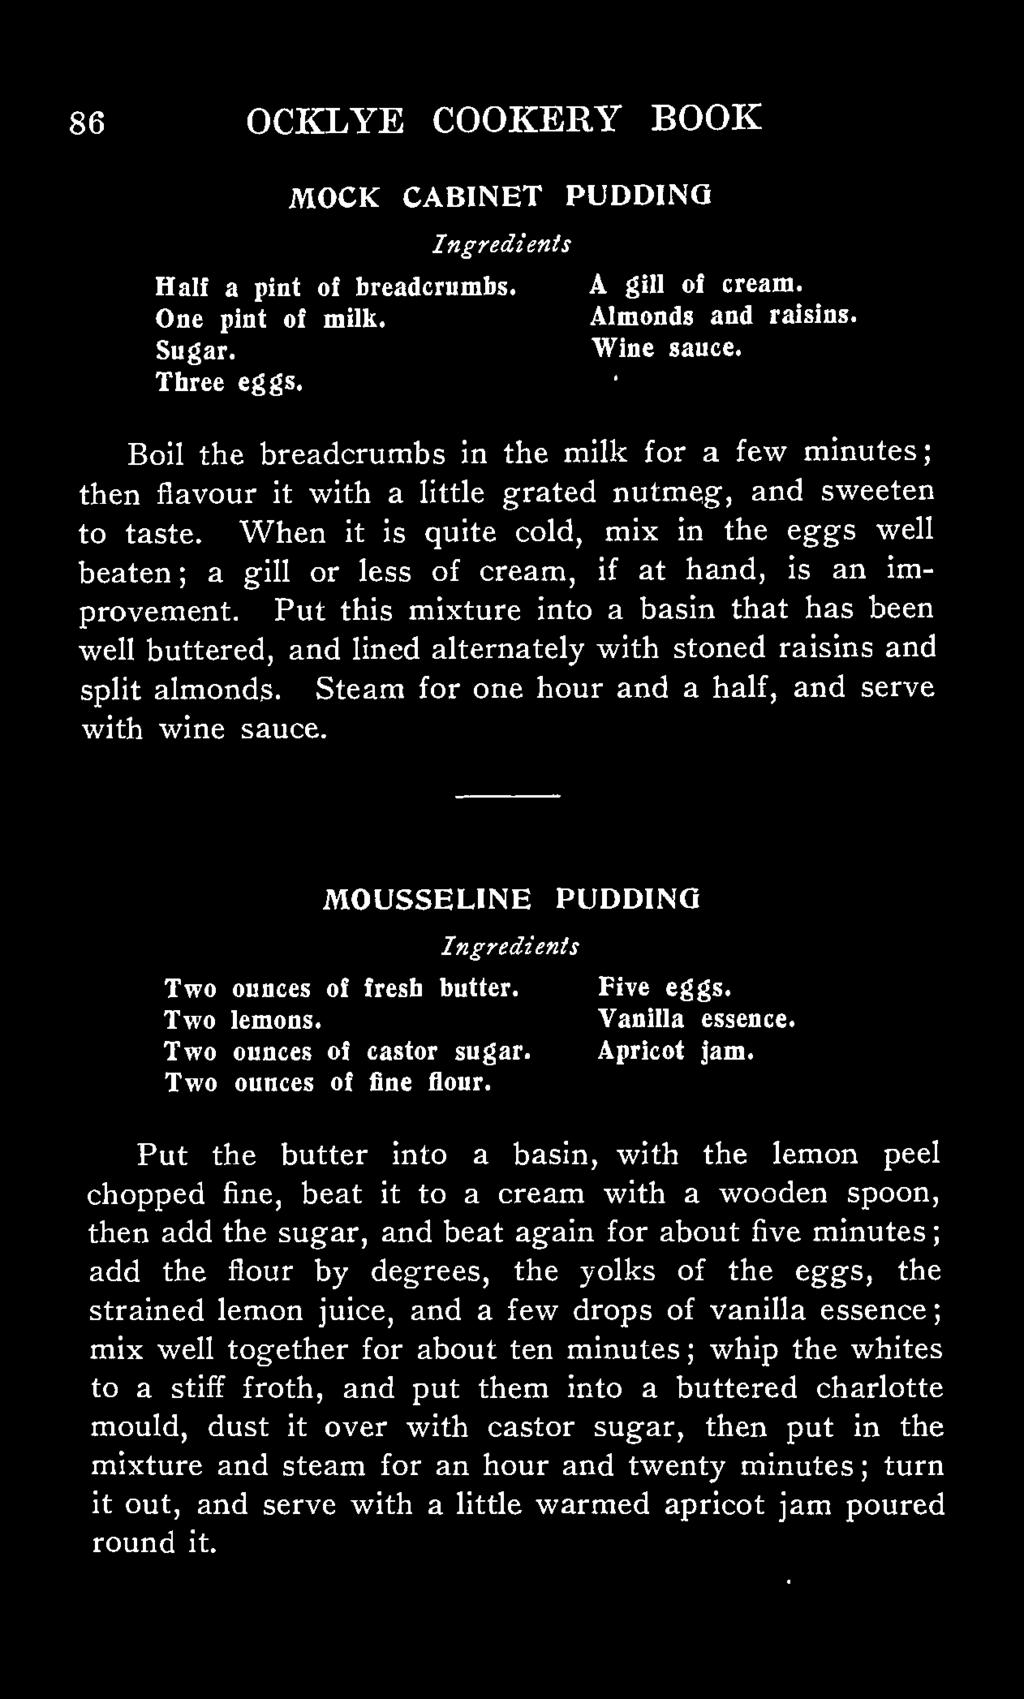 When it is quite cold, mix in the eggs well beaten; a gill or less of cream, if at hand, is an improvement.